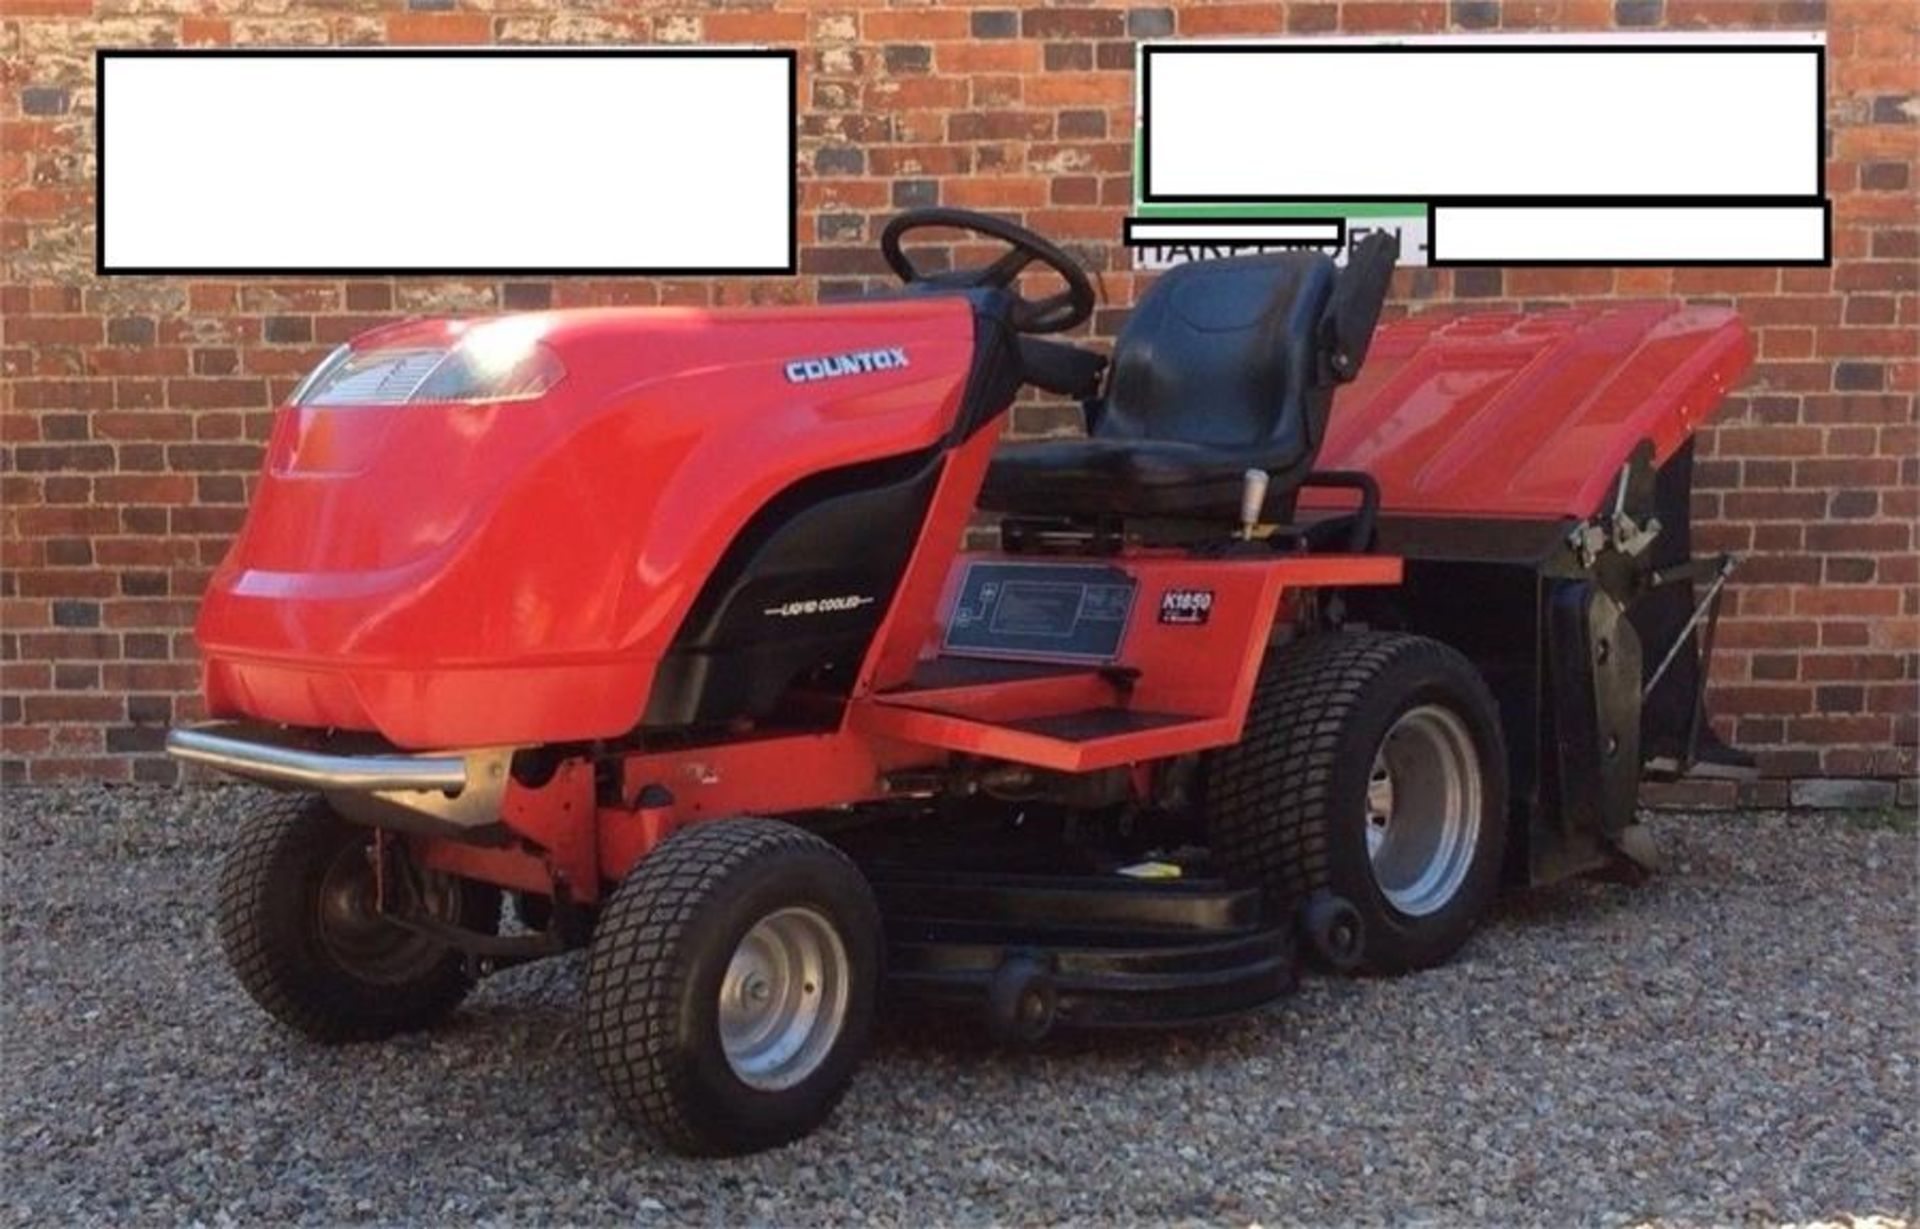 Countax K18-50 Ride On Mower sit on lawn - Image 4 of 11